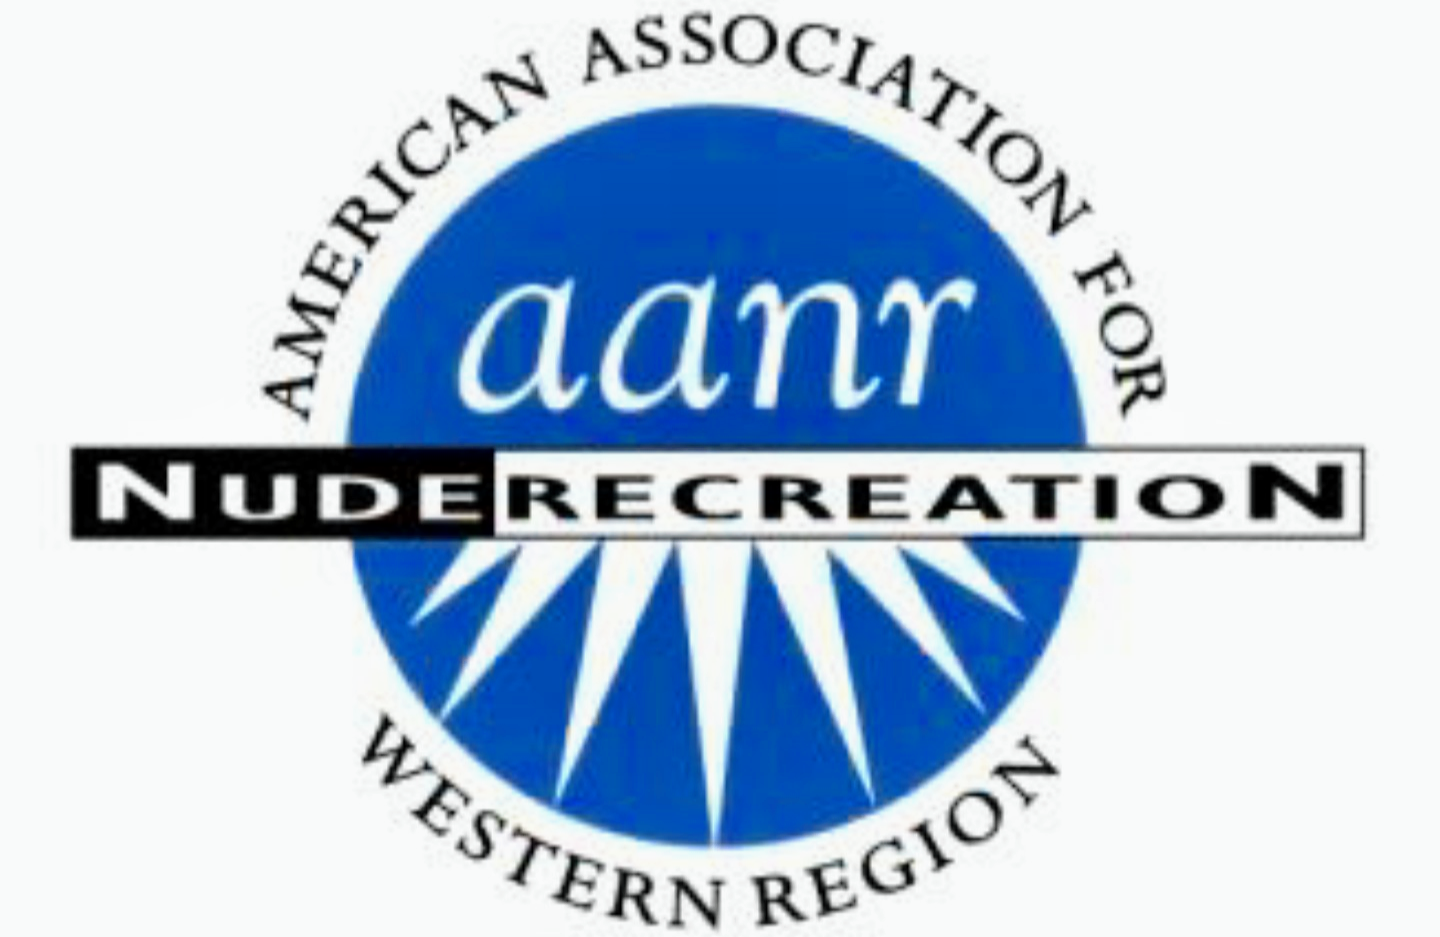 The American Association for Nude Recreation - Western Region